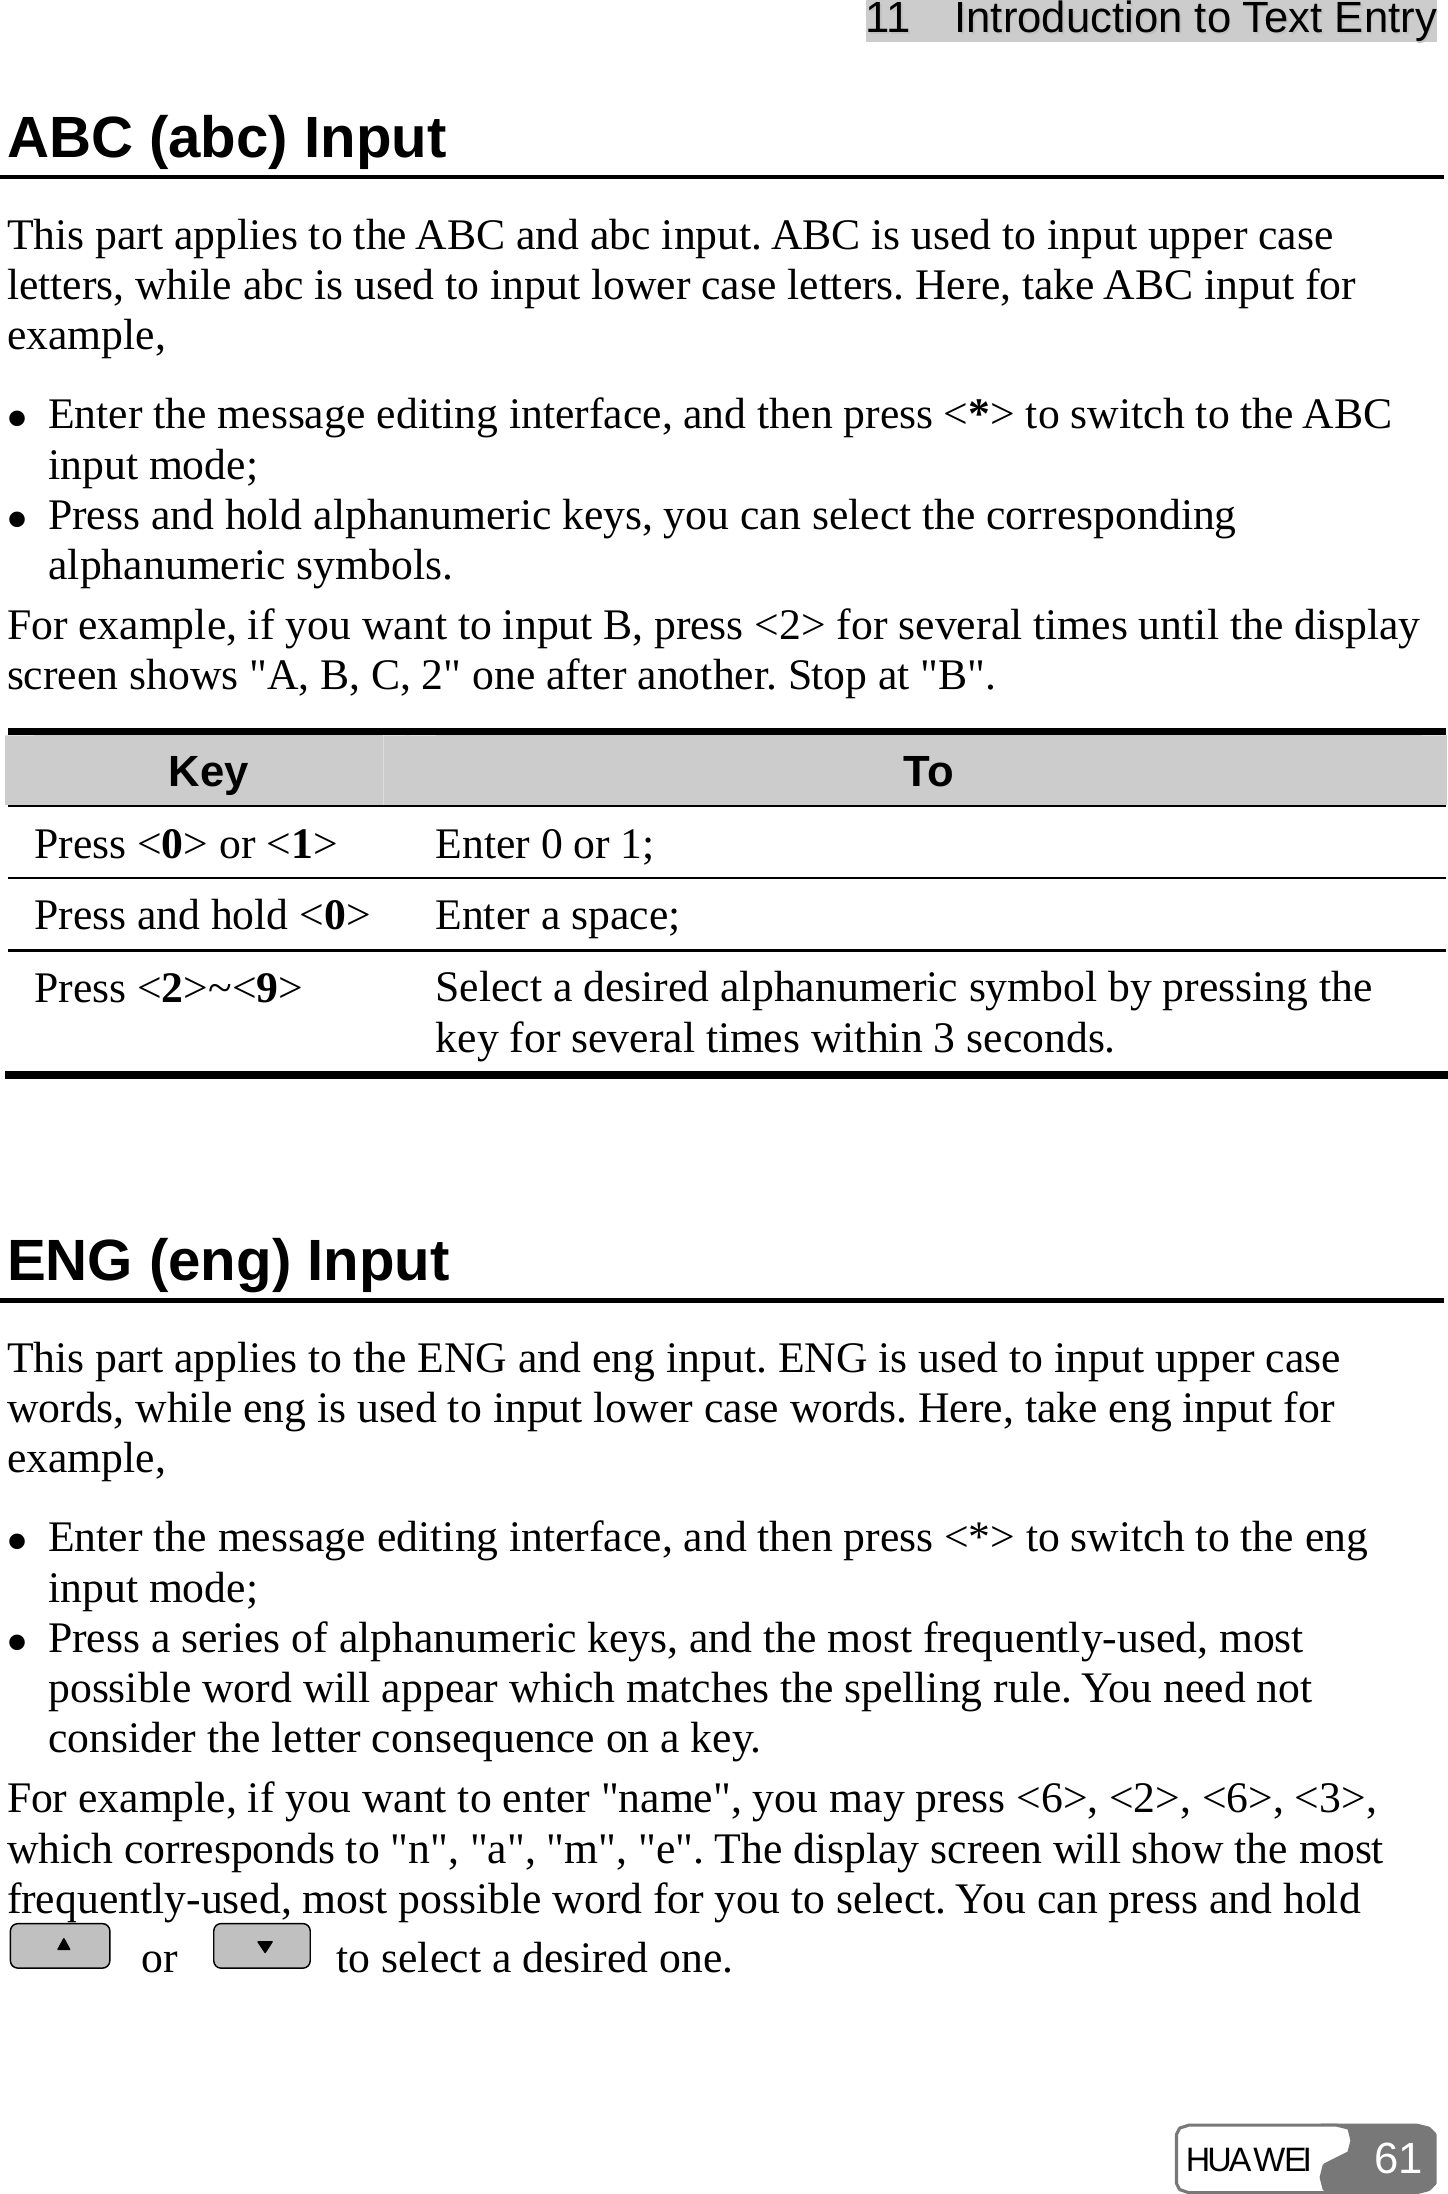 1111    IInnttrroodduuccttiioonn  ttoo  TTeexxtt  EEnnttrryy  HUAWEI 61ABC (abc) Input This part applies to the ABC and abc input. ABC is used to input upper case letters, while abc is used to input lower case letters. Here, take ABC input for example, z Enter the message editing interface, and then press &lt;*&gt; to switch to the ABC input mode; z Press and hold alphanumeric keys, you can select the corresponding alphanumeric symbols. For example, if you want to input B, press &lt;2&gt; for several times until the display screen shows &quot;A, B, C, 2&quot; one after another. Stop at &quot;B&quot;. Key  To Press &lt;0&gt; or &lt;1&gt;  Enter 0 or 1; Press and hold &lt;0&gt; Enter a space; Press &lt;2&gt;~&lt;9&gt;  Select a desired alphanumeric symbol by pressing the key for several times within 3 seconds.  ENG (eng) Input This part applies to the ENG and eng input. ENG is used to input upper case words, while eng is used to input lower case words. Here, take eng input for example, z Enter the message editing interface, and then press &lt;*&gt; to switch to the eng input mode; z Press a series of alphanumeric keys, and the most frequently-used, most possible word will appear which matches the spelling rule. You need not consider the letter consequence on a key. For example, if you want to enter &quot;name&quot;, you may press &lt;6&gt;, &lt;2&gt;, &lt;6&gt;, &lt;3&gt;, which corresponds to &quot;n&quot;, &quot;a&quot;, &quot;m&quot;, &quot;e&quot;. The display screen will show the most frequently-used, most possible word for you to select. You can press and hold  or    to select a desired one. 